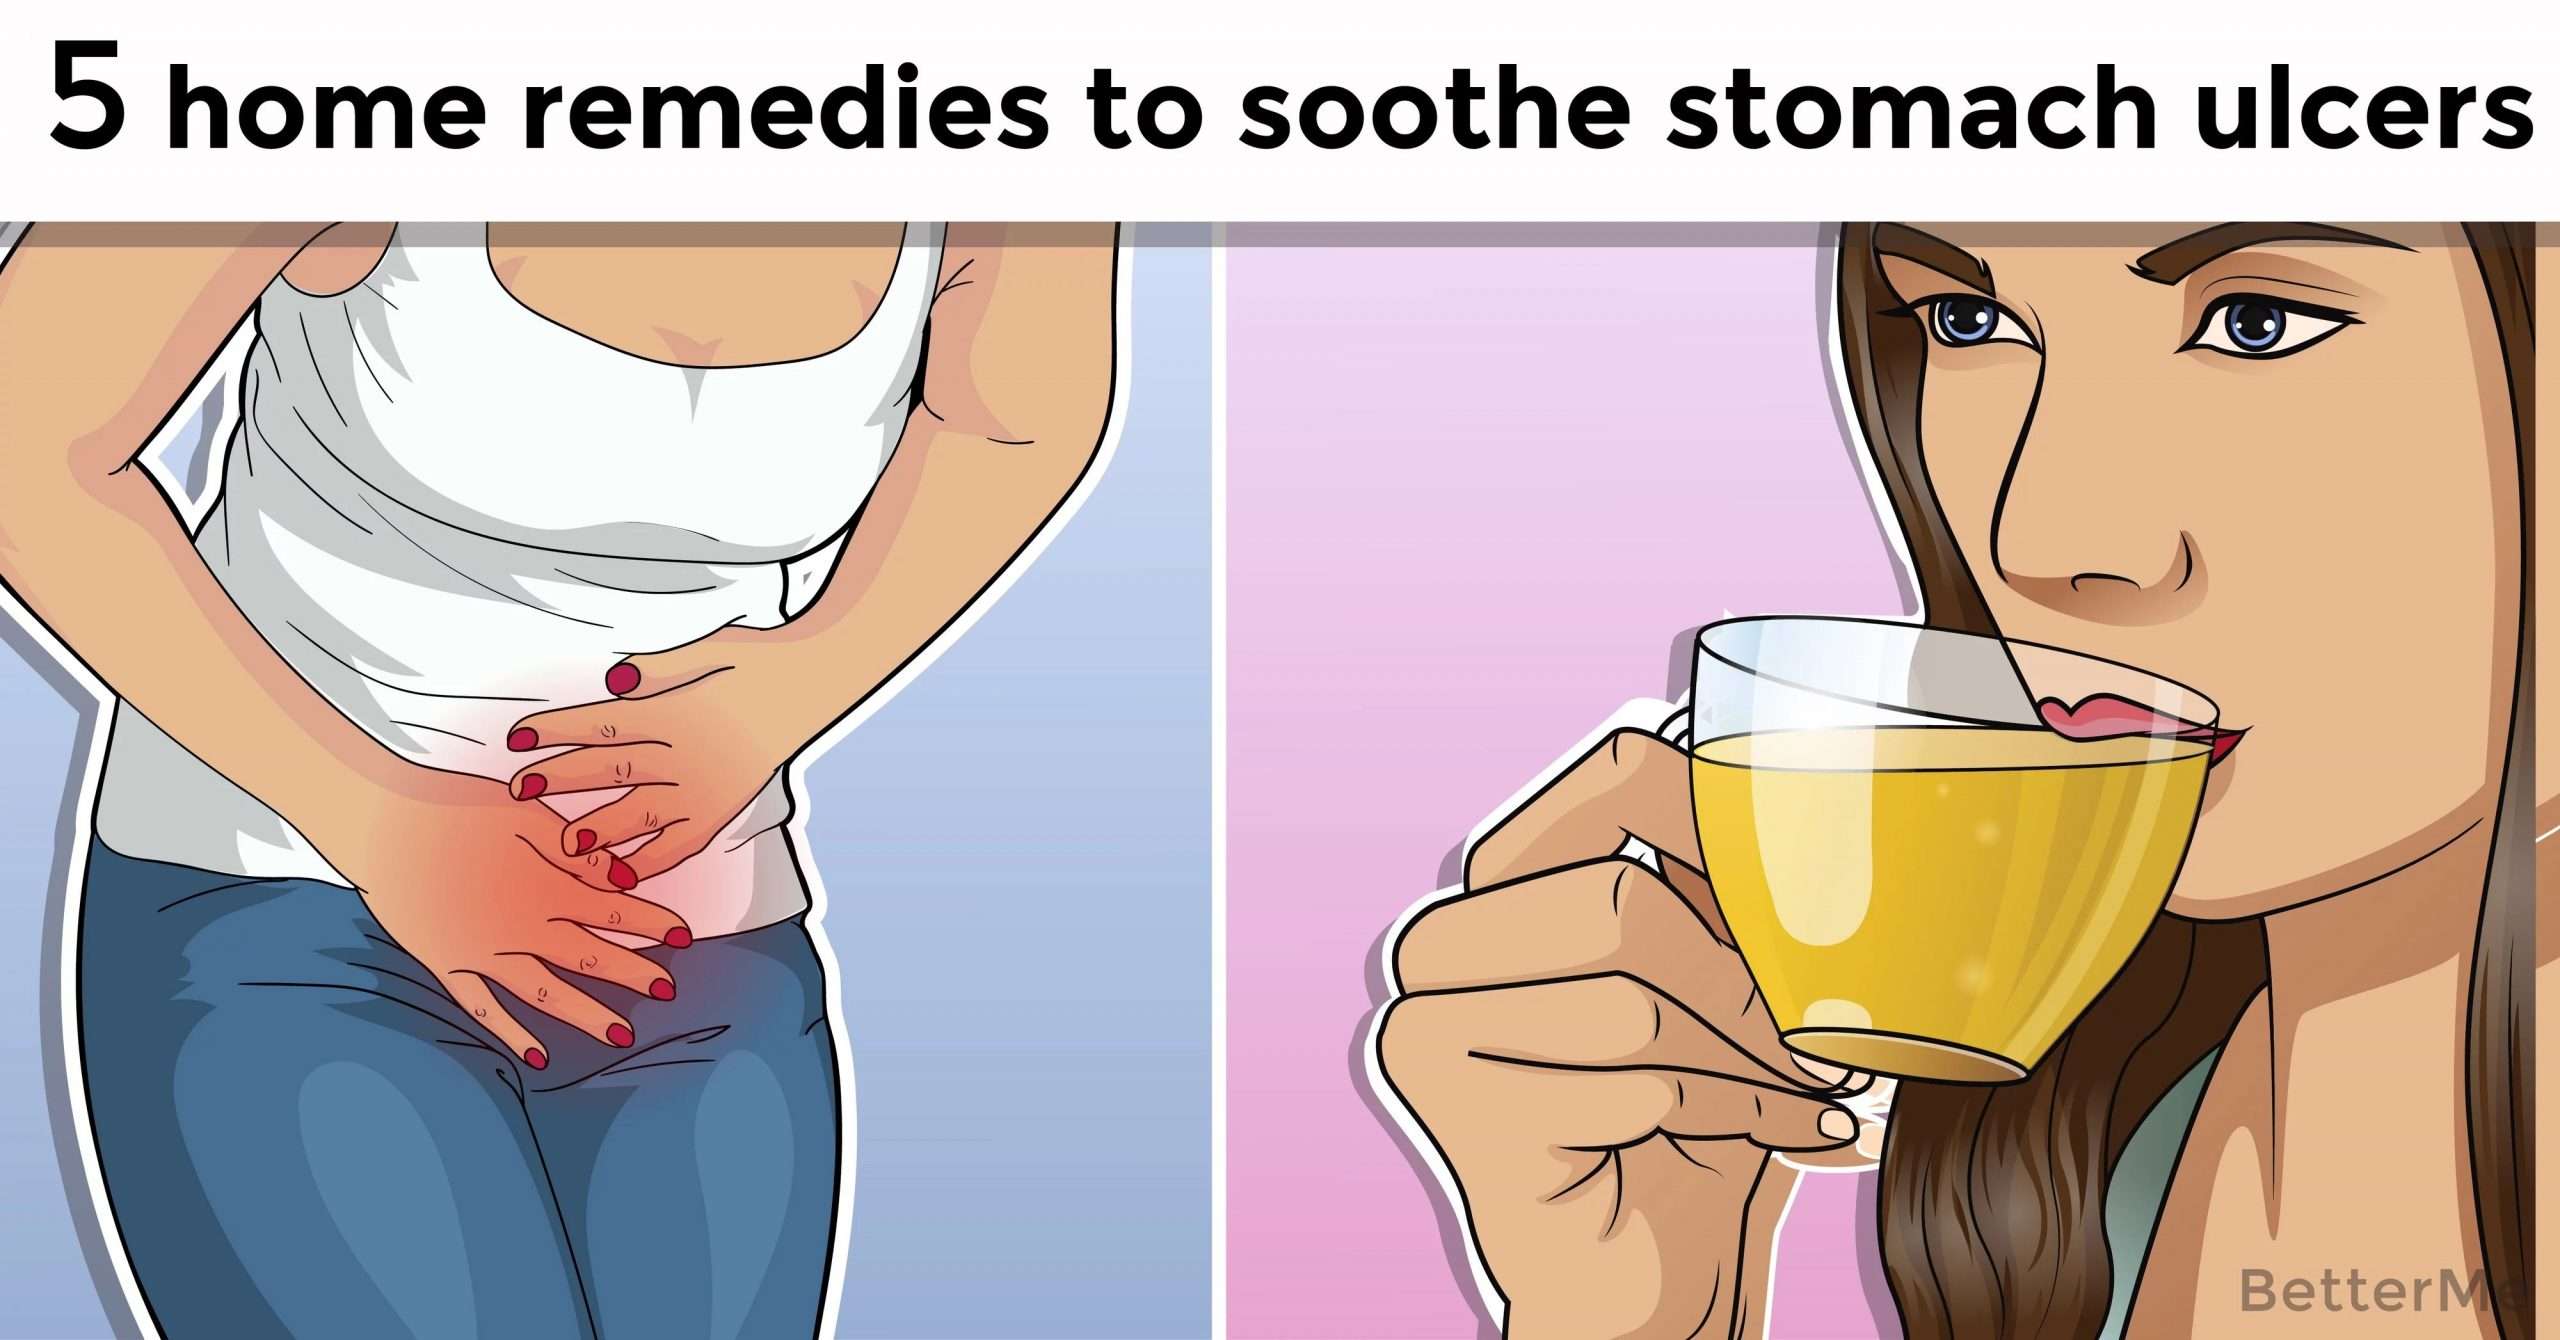 5 home remedies to soothe stomach ulcers